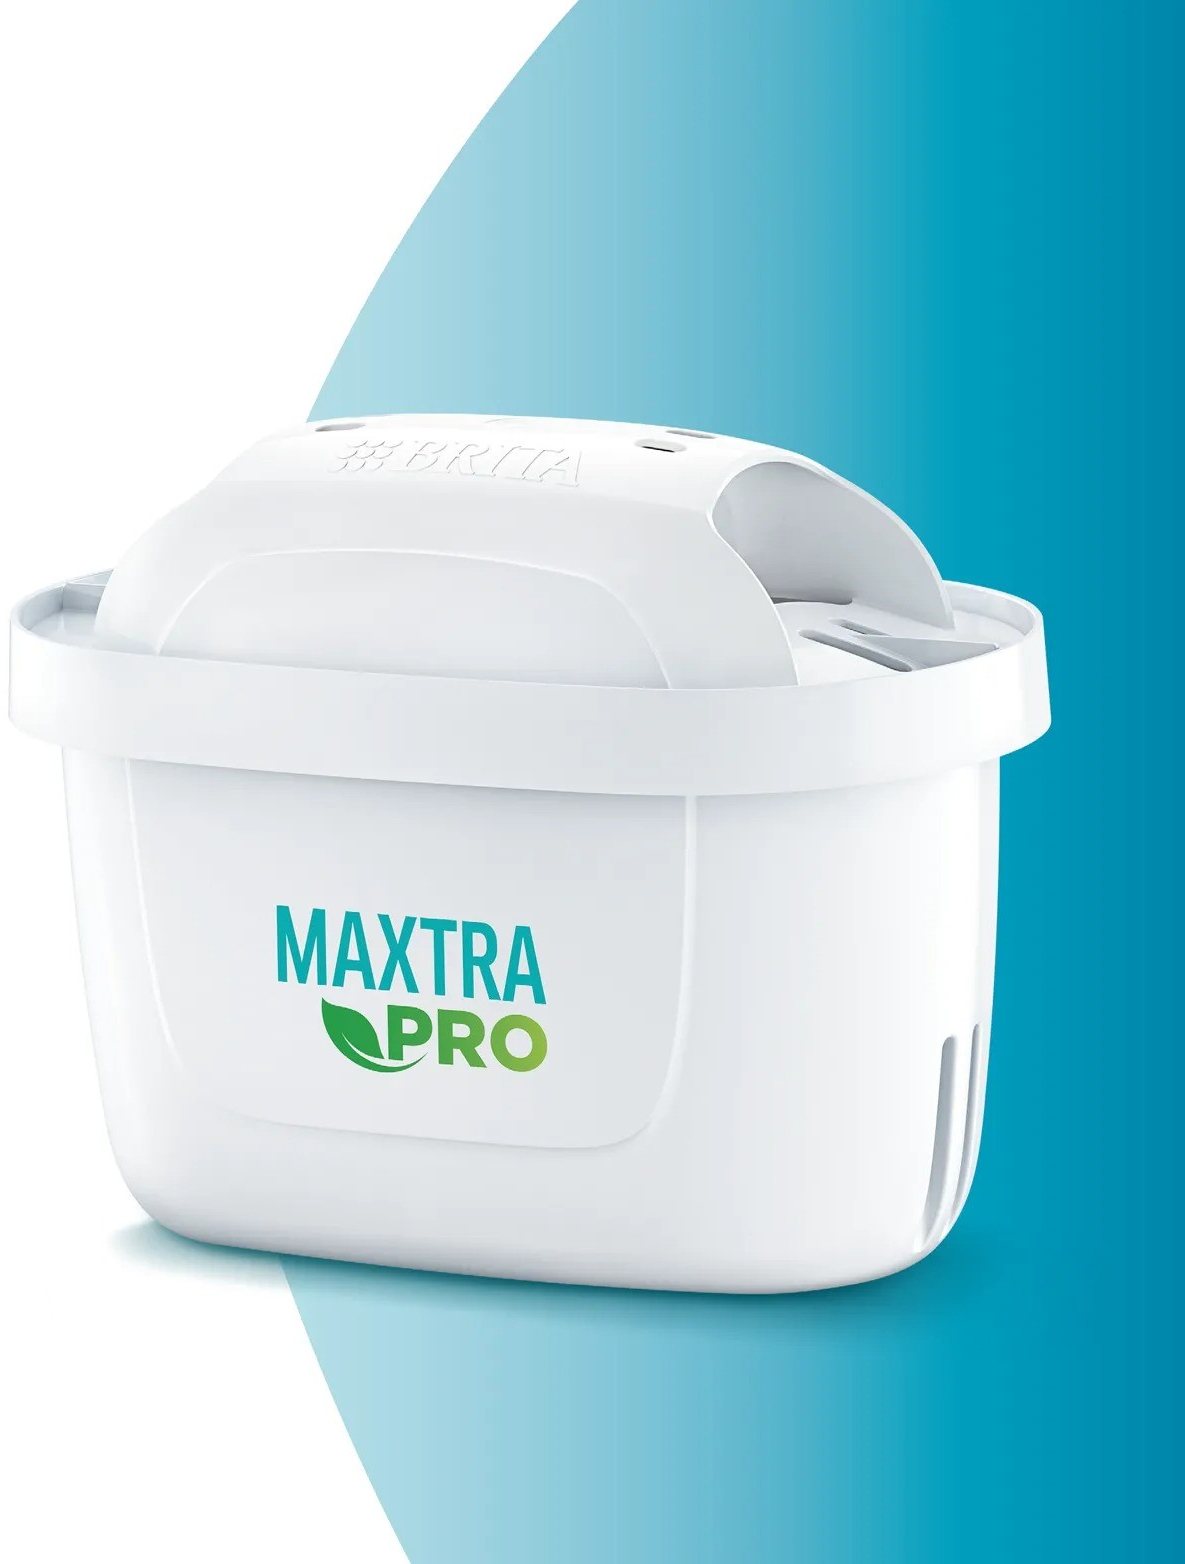 Brita MAXTRA PRO All-in-1 Water Filter Cartridges 6 Pack, £18 at ASDA